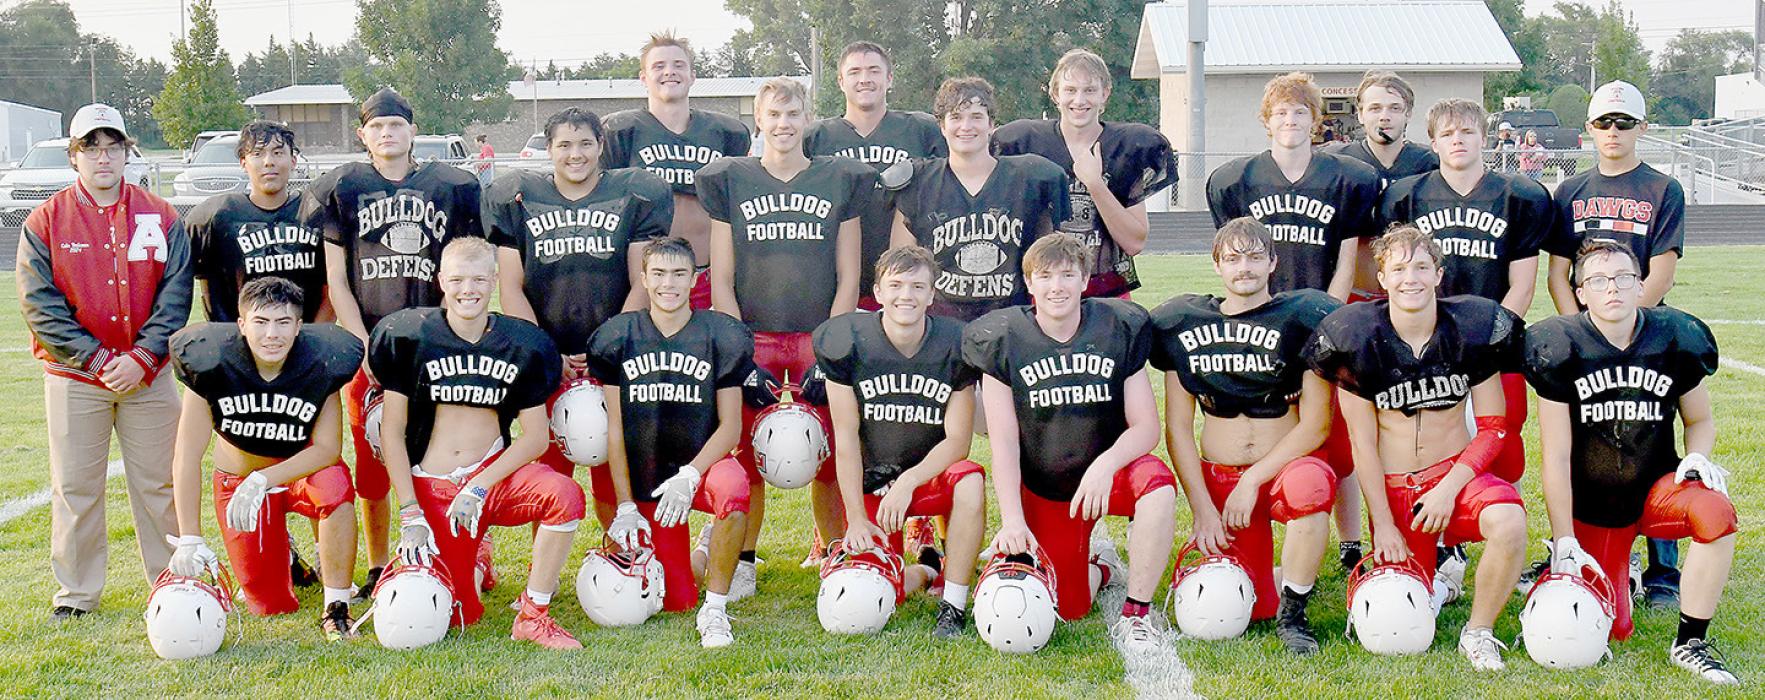 Ainsworth Bulldog Football Team to Start New Season With Opener Against North Central